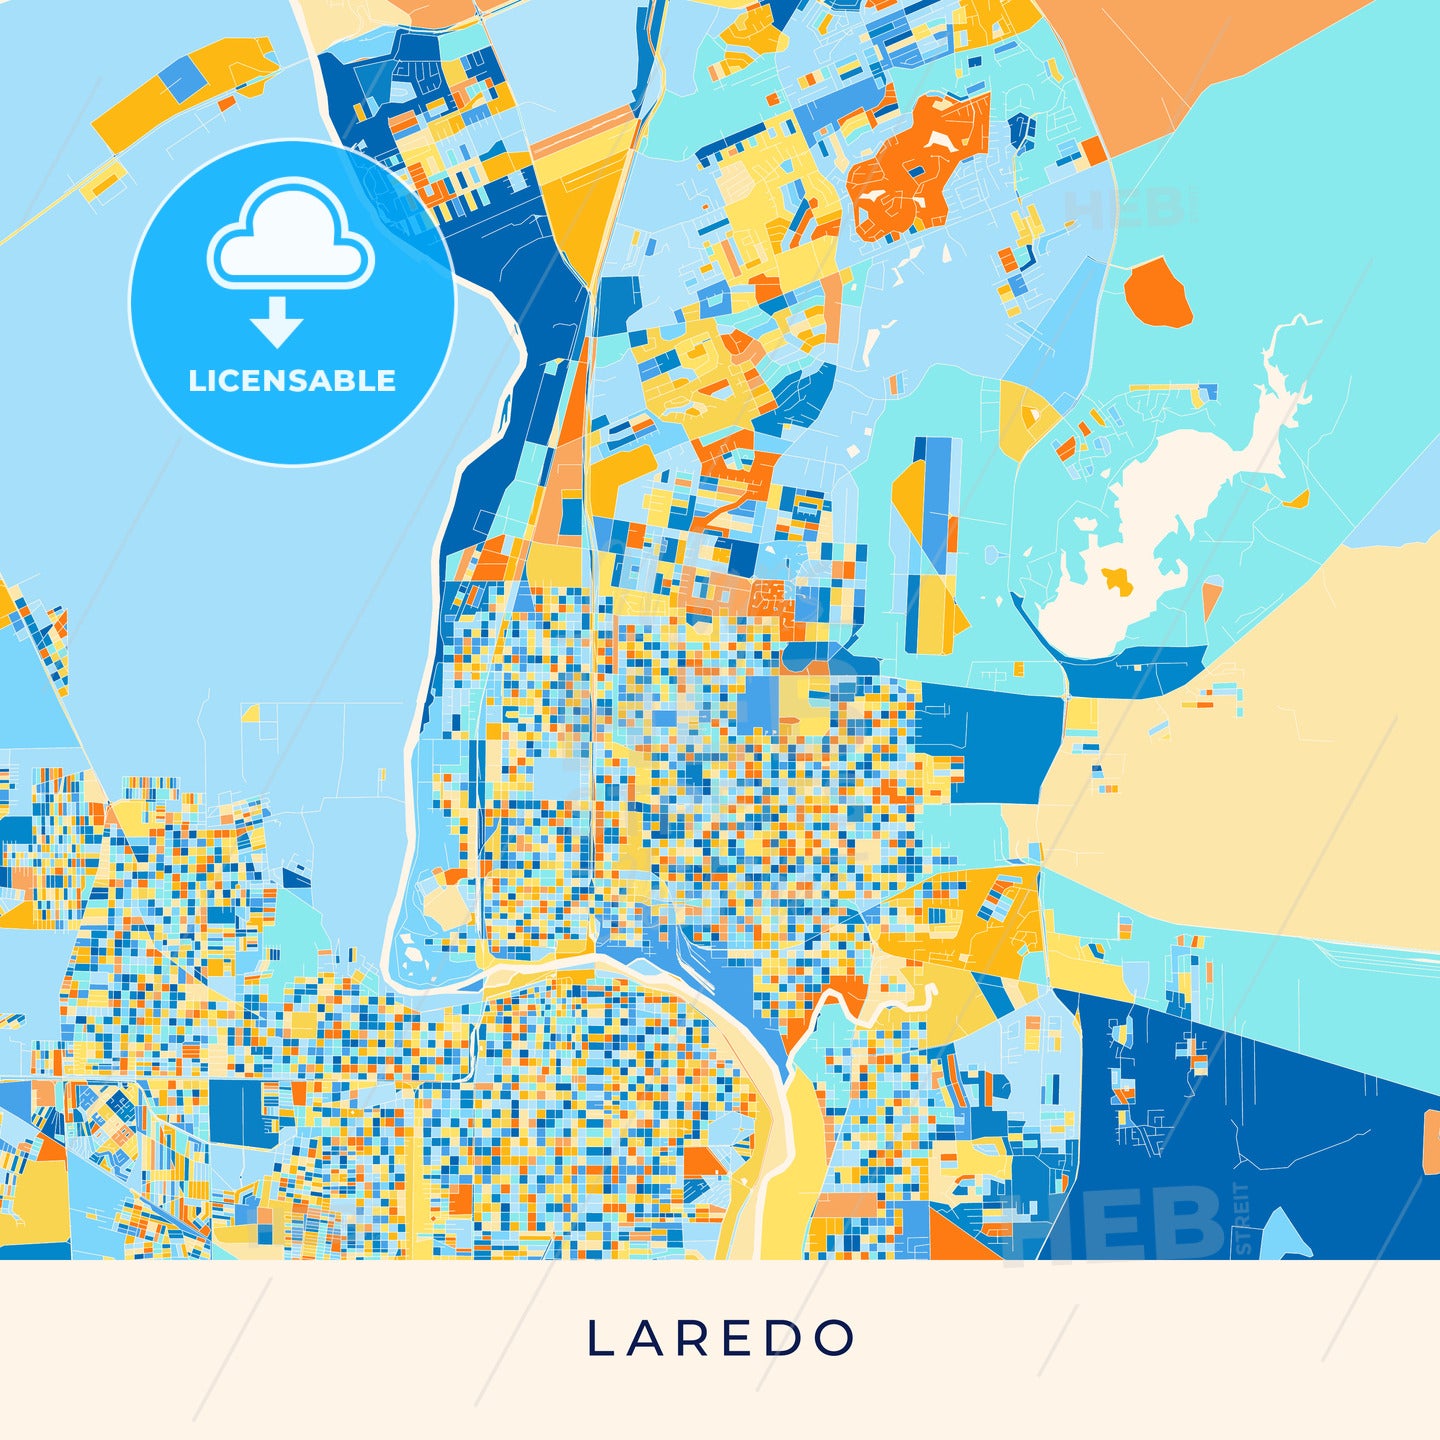 Laredo colorful map poster template